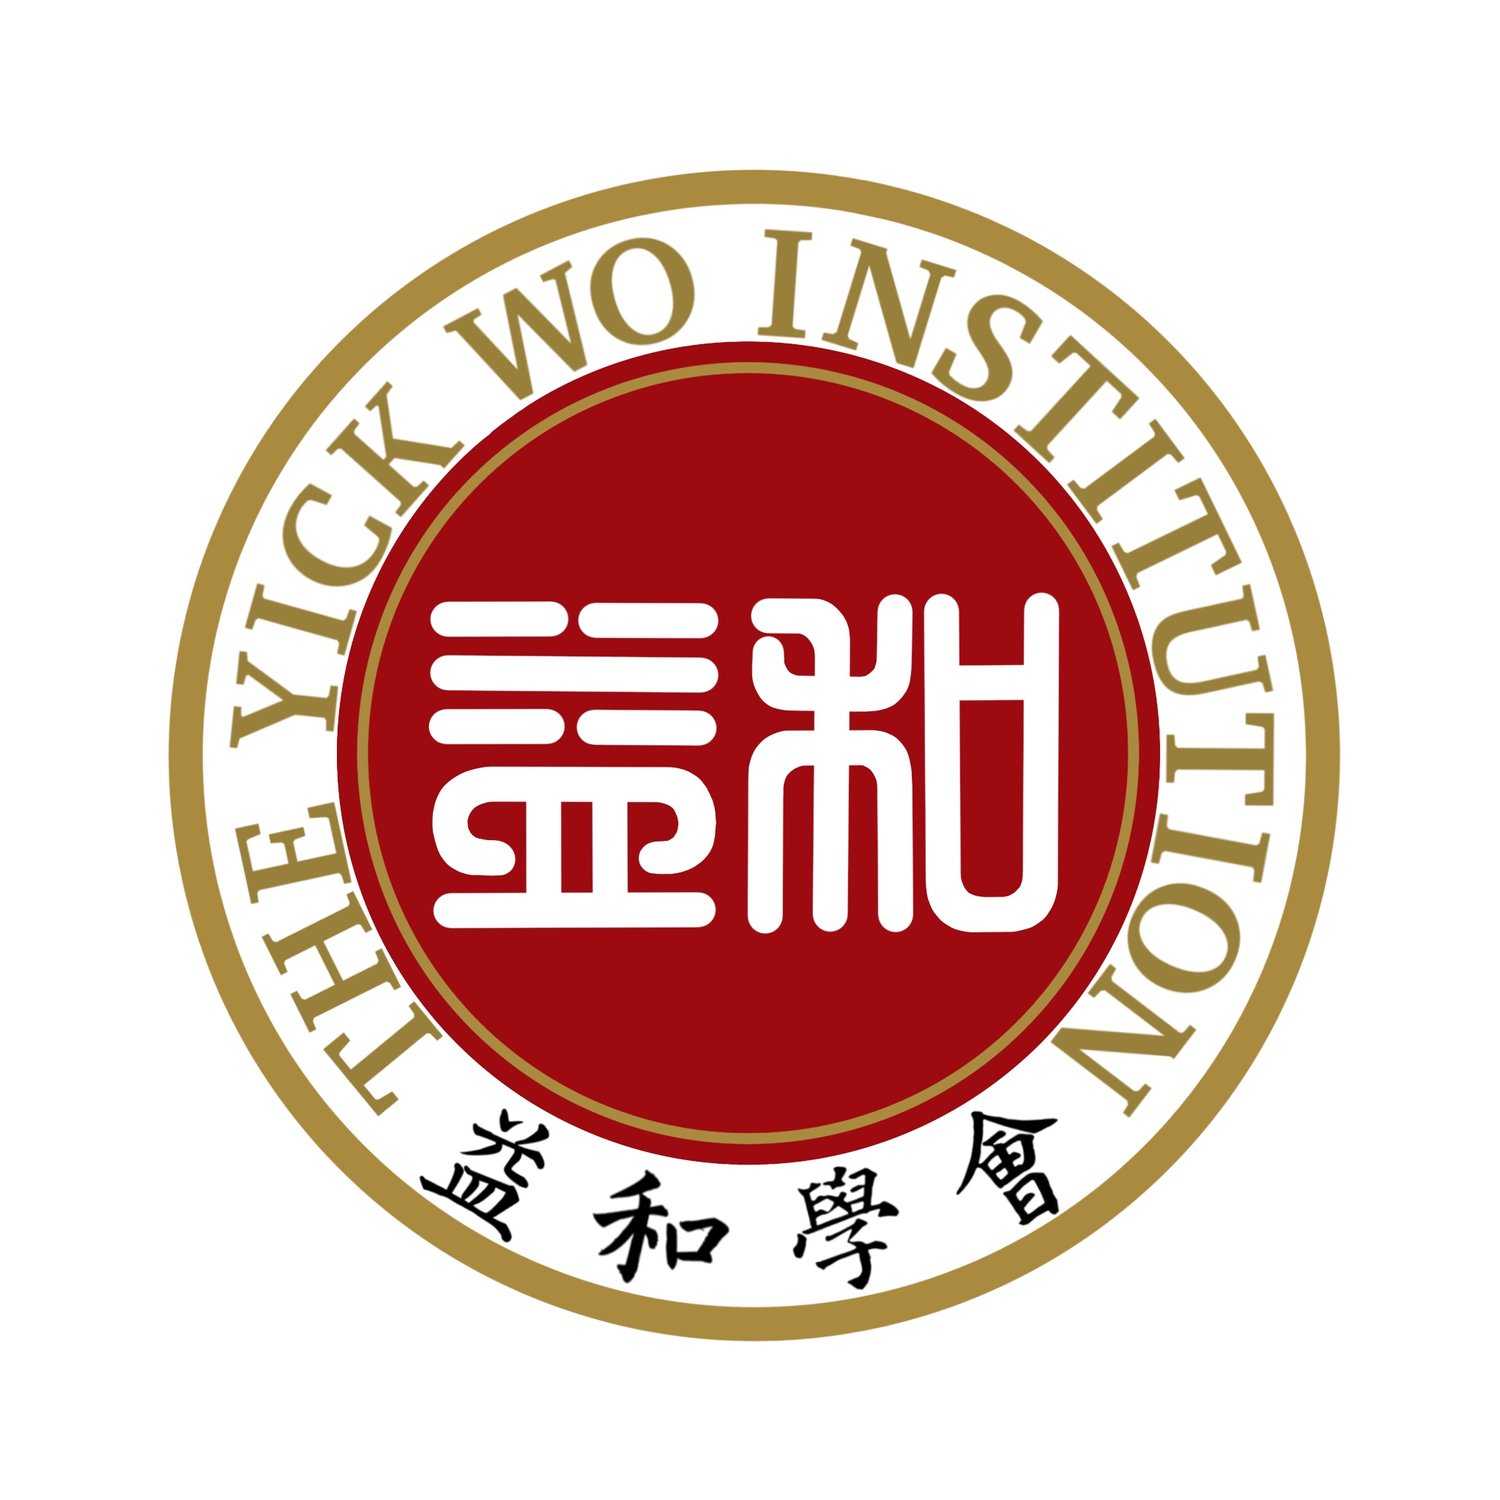 The Yick Wo Institution